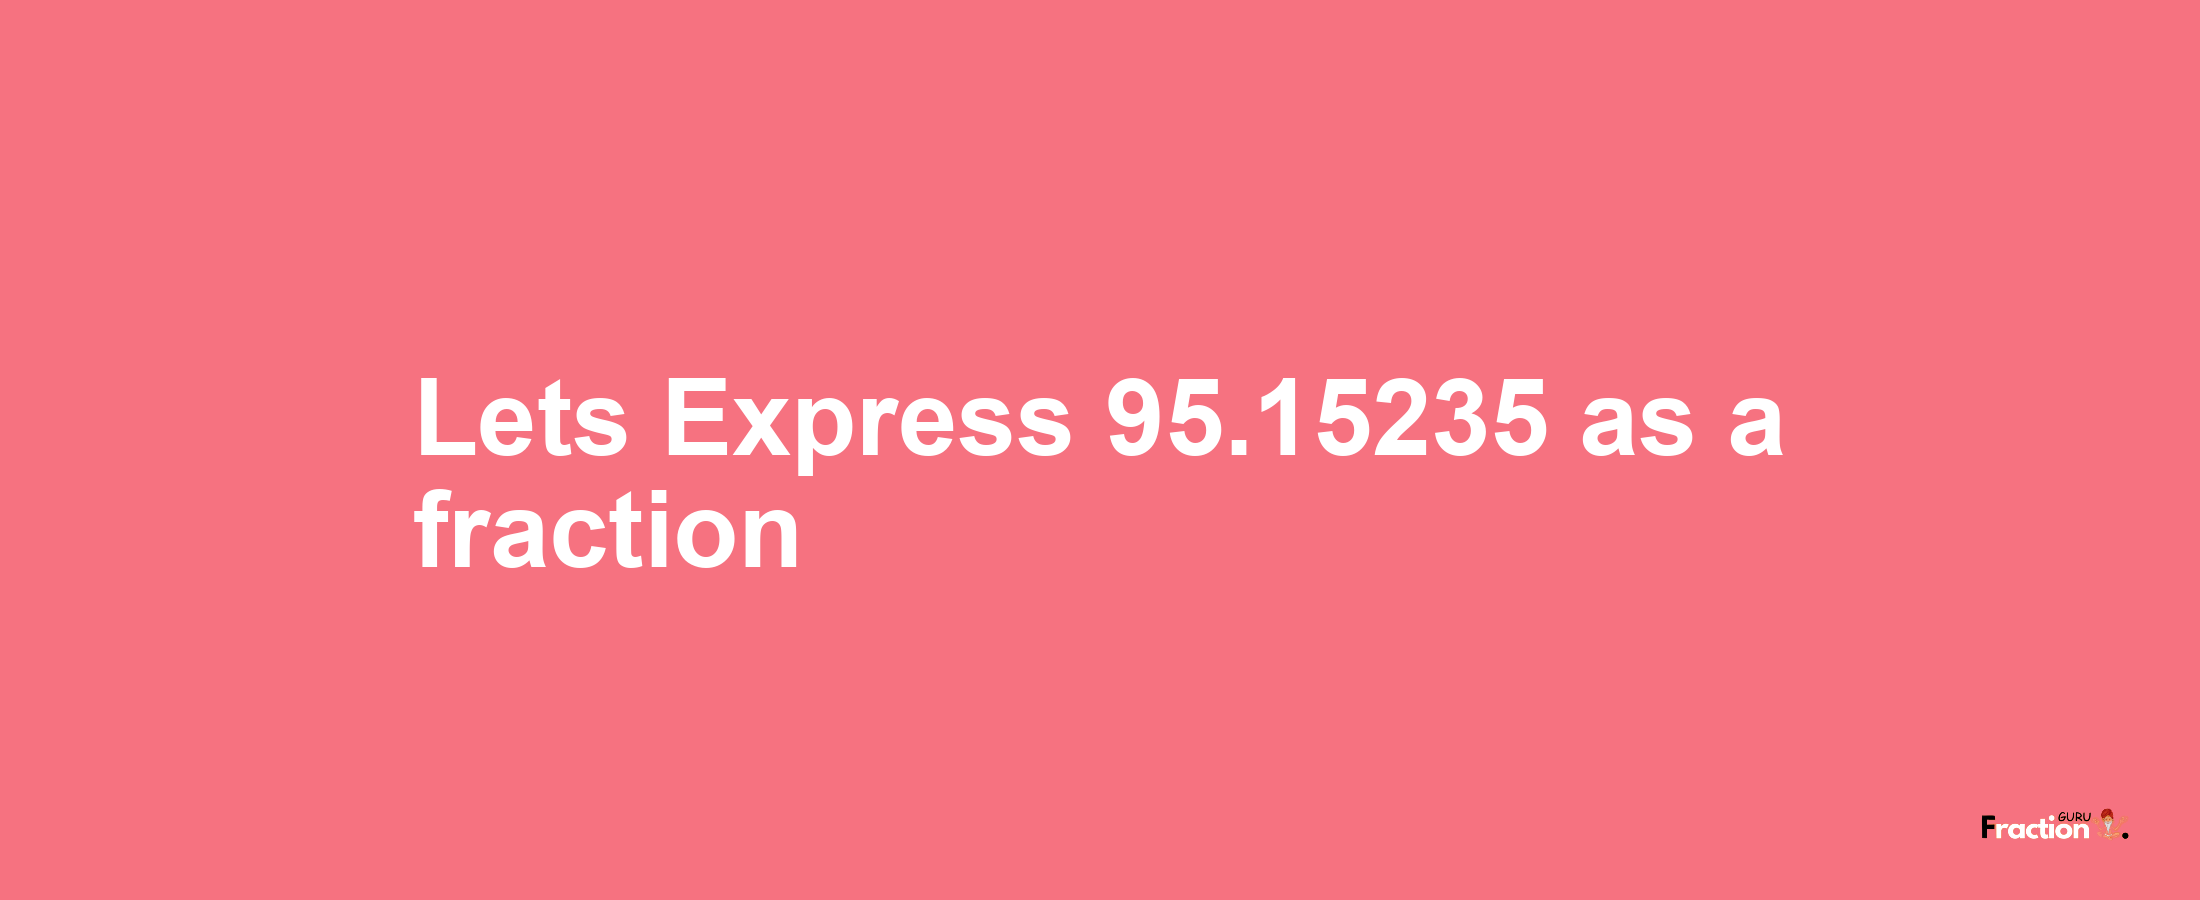 Lets Express 95.15235 as afraction